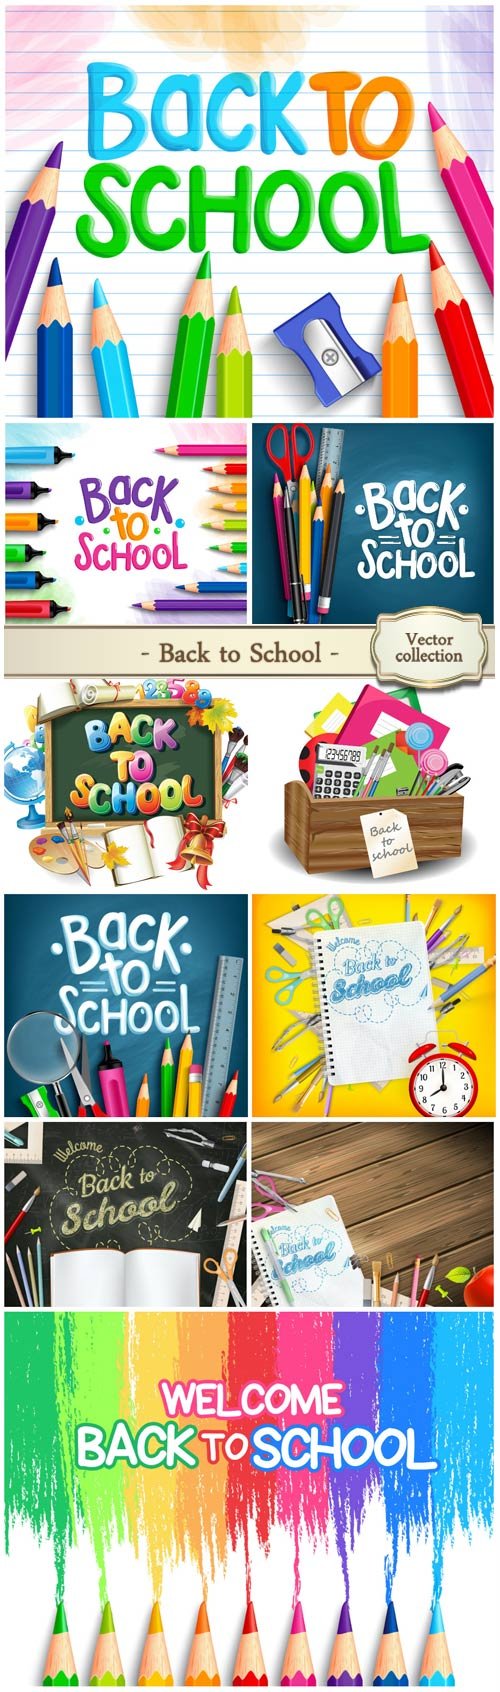 School vector, backgrounds with pencils and school subjects